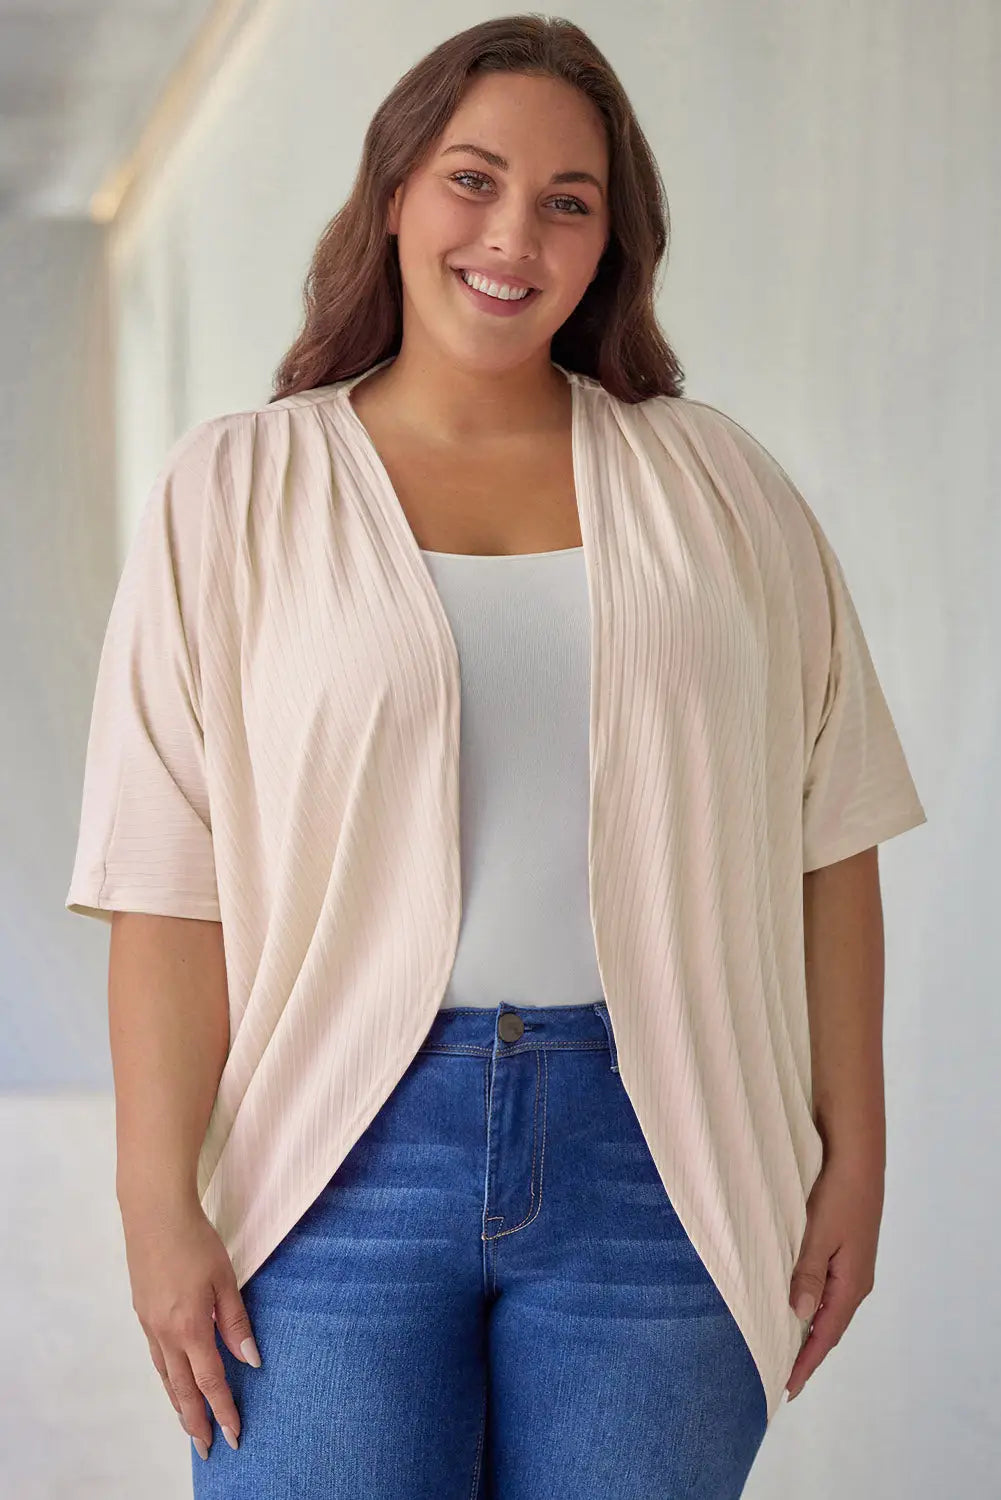 Apricot shimmer ribbed texture plus size cardigan - 1x /